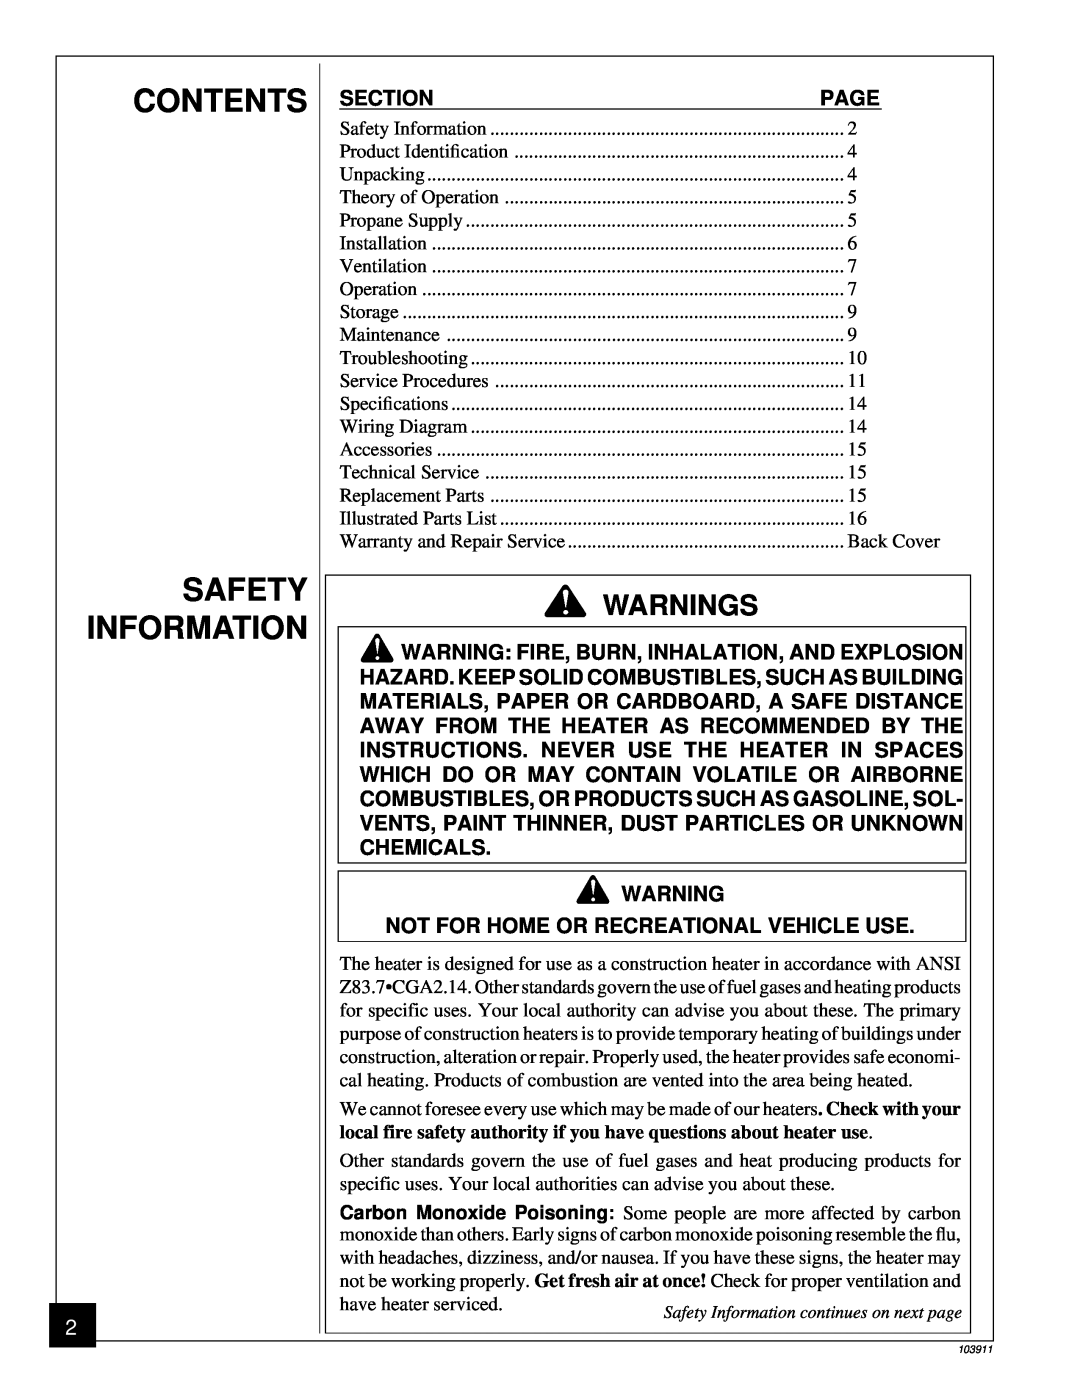 Desa RCLP50B owner manual Contents Safety Information, Warnings 